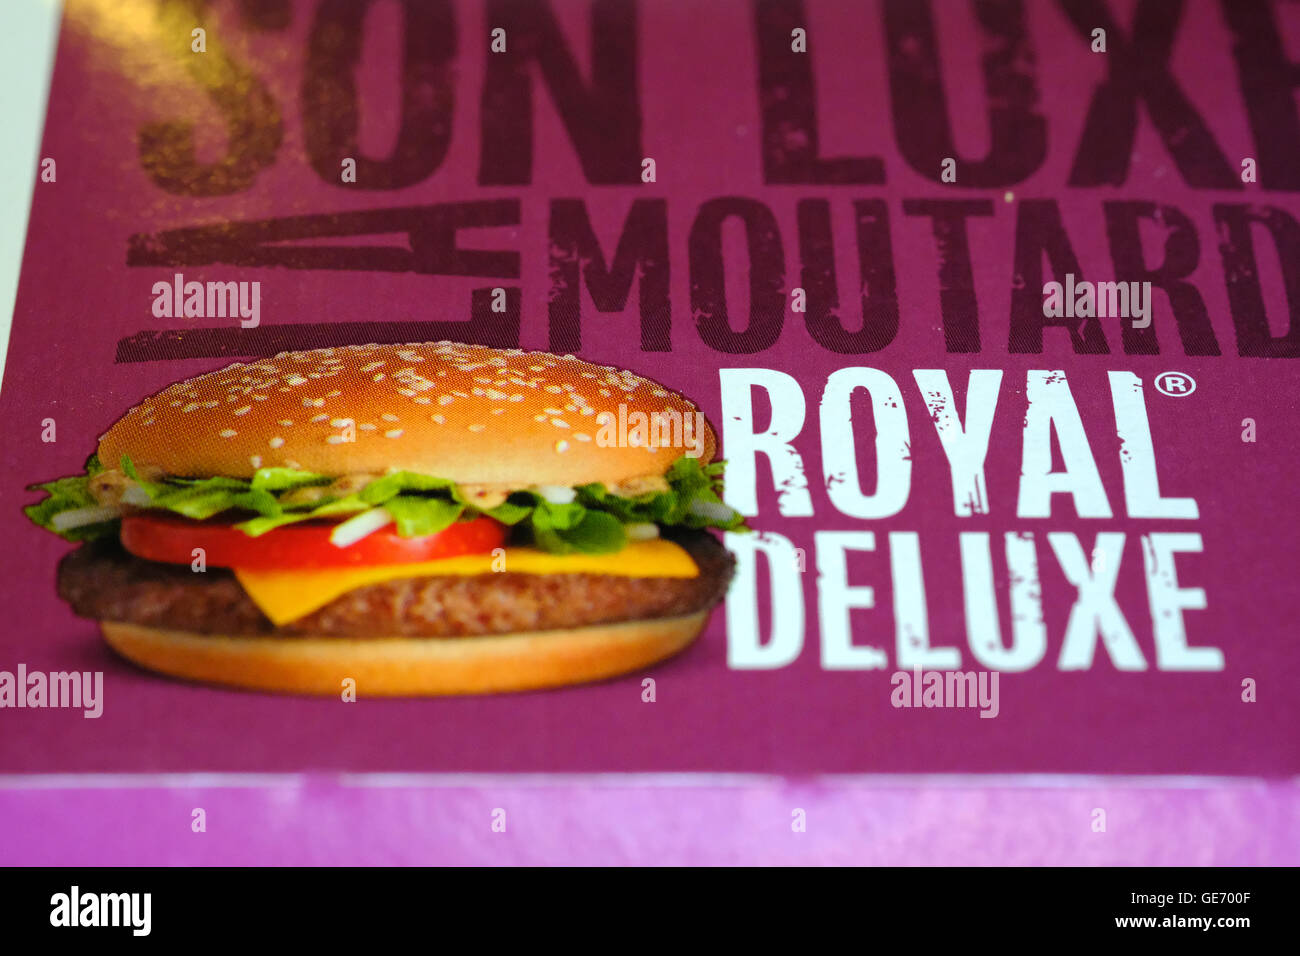 A Mcdonald's French Royal Deluxe box Stock Photo